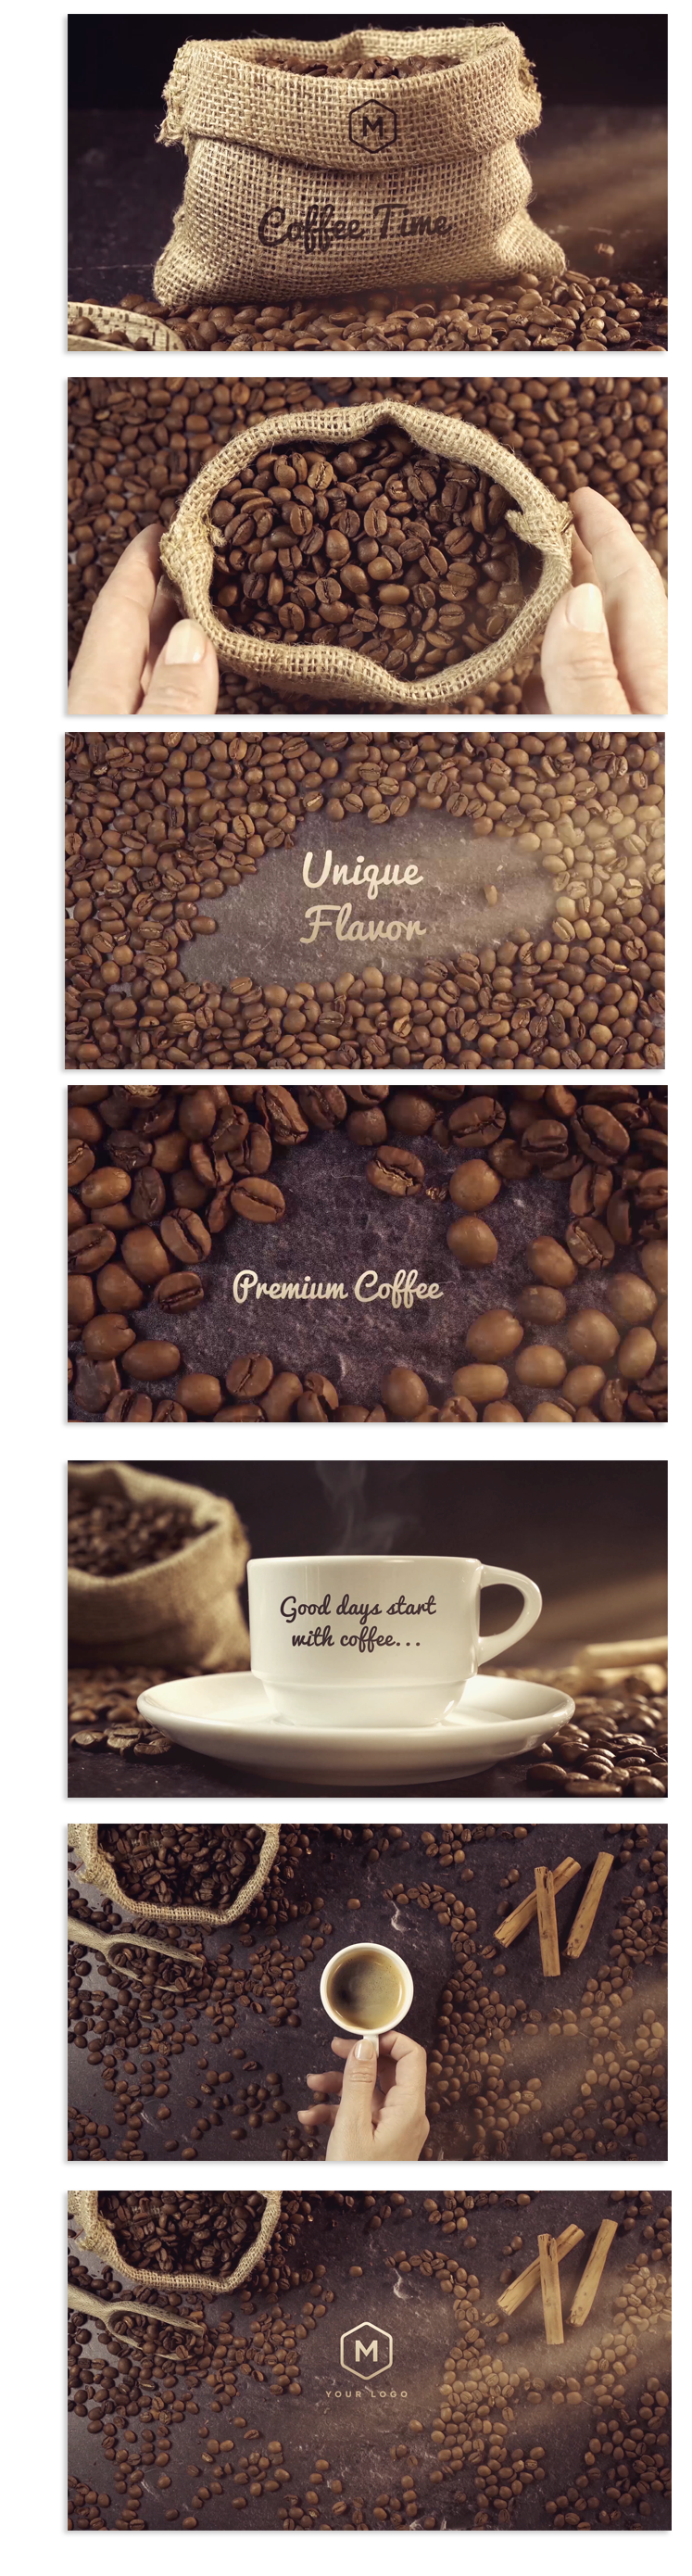 after-effects-emplate-coffeePomo.png?dl=0